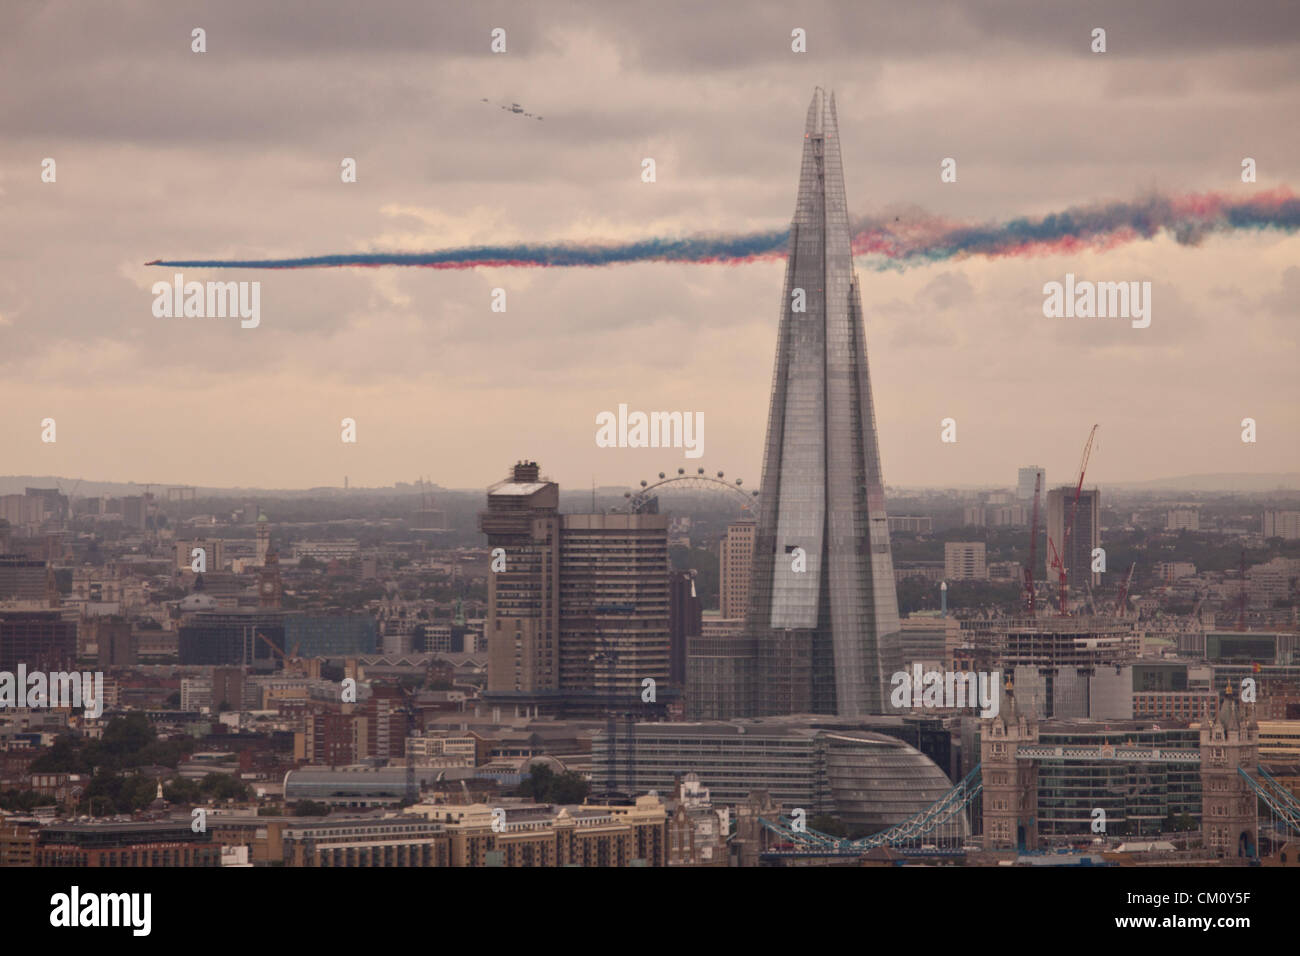 LONDON, UK, 10th Sep, 2012. The Royal Air Force Red Arrows aerobatic display team perform a flypast over London as a tribute to the Team GB Olympic and Paralympic athletes. Credit:  Steve Bright / Alamy Live News Stock Photo